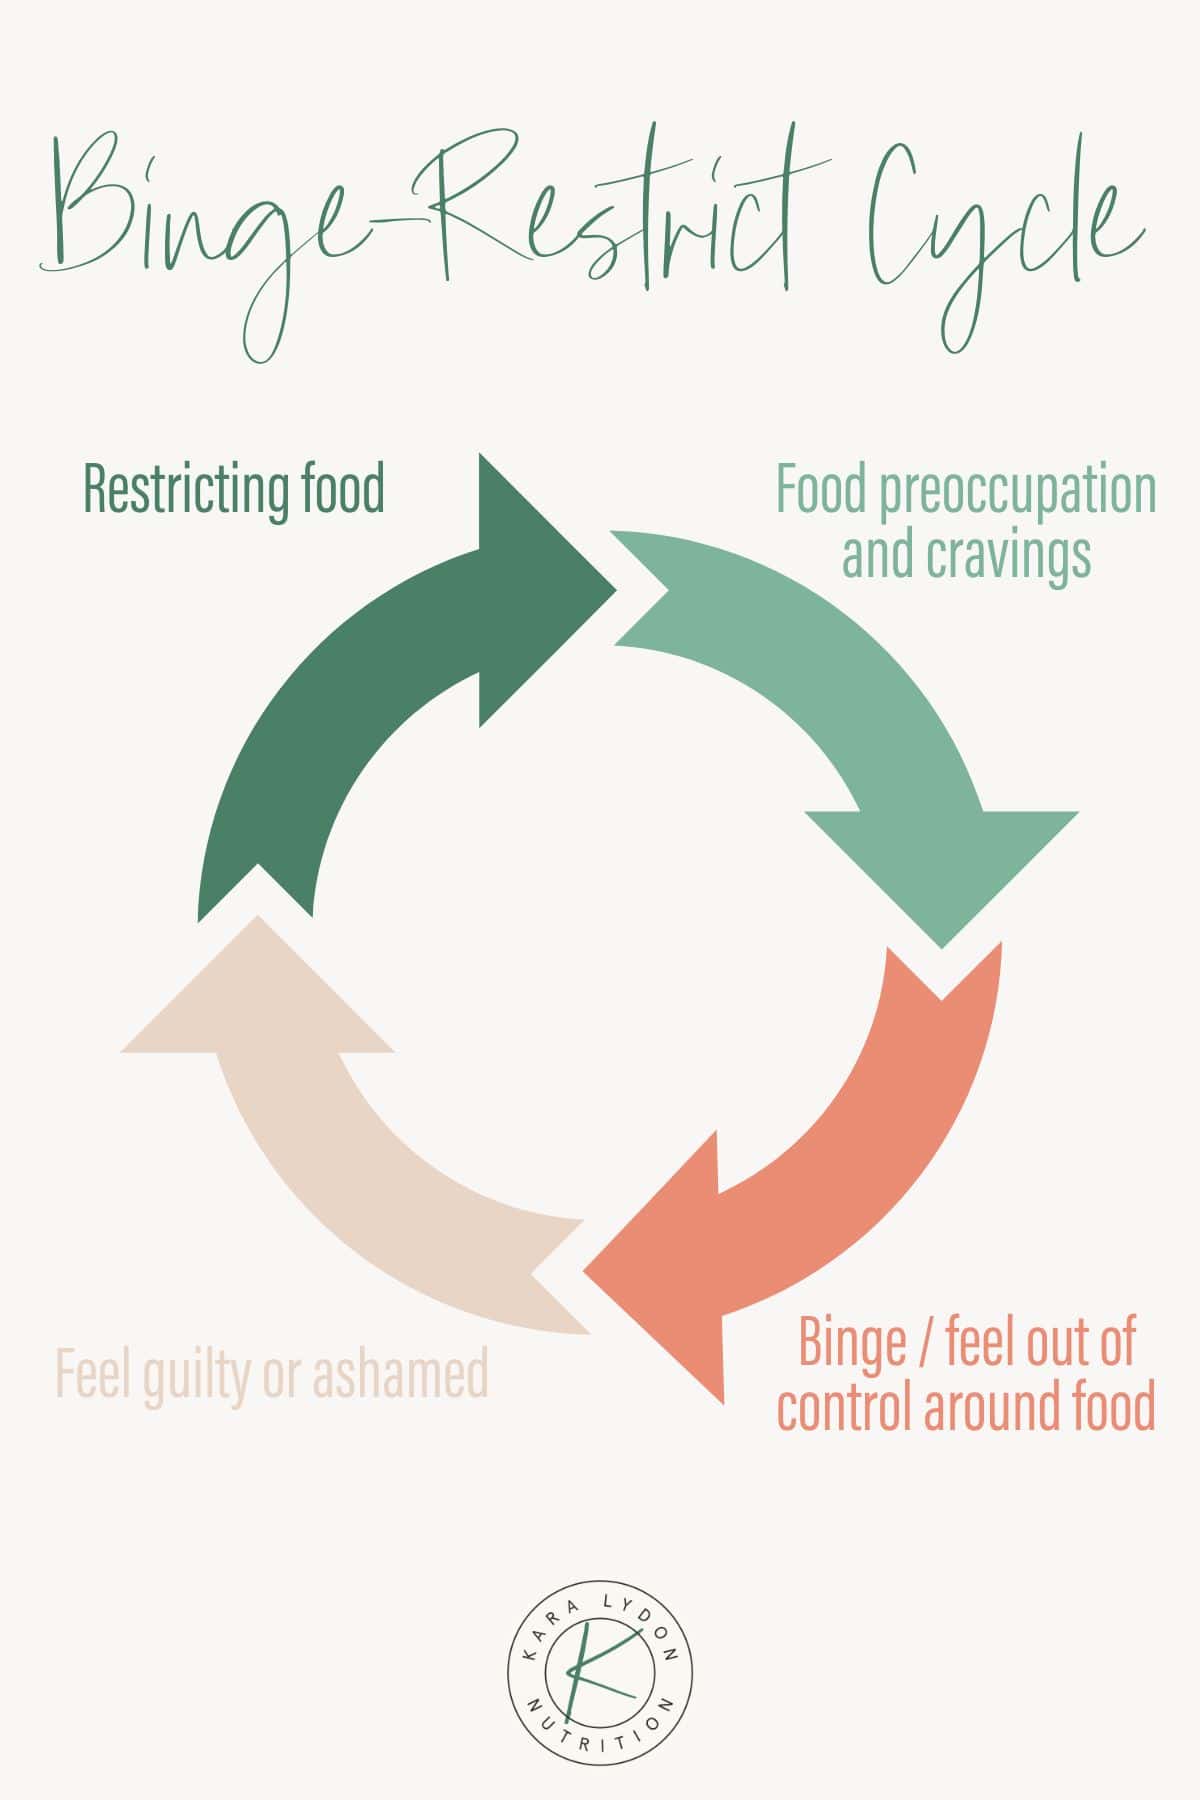 Graphic illustrating the four steps of the Binge-Restrict Cycle. 